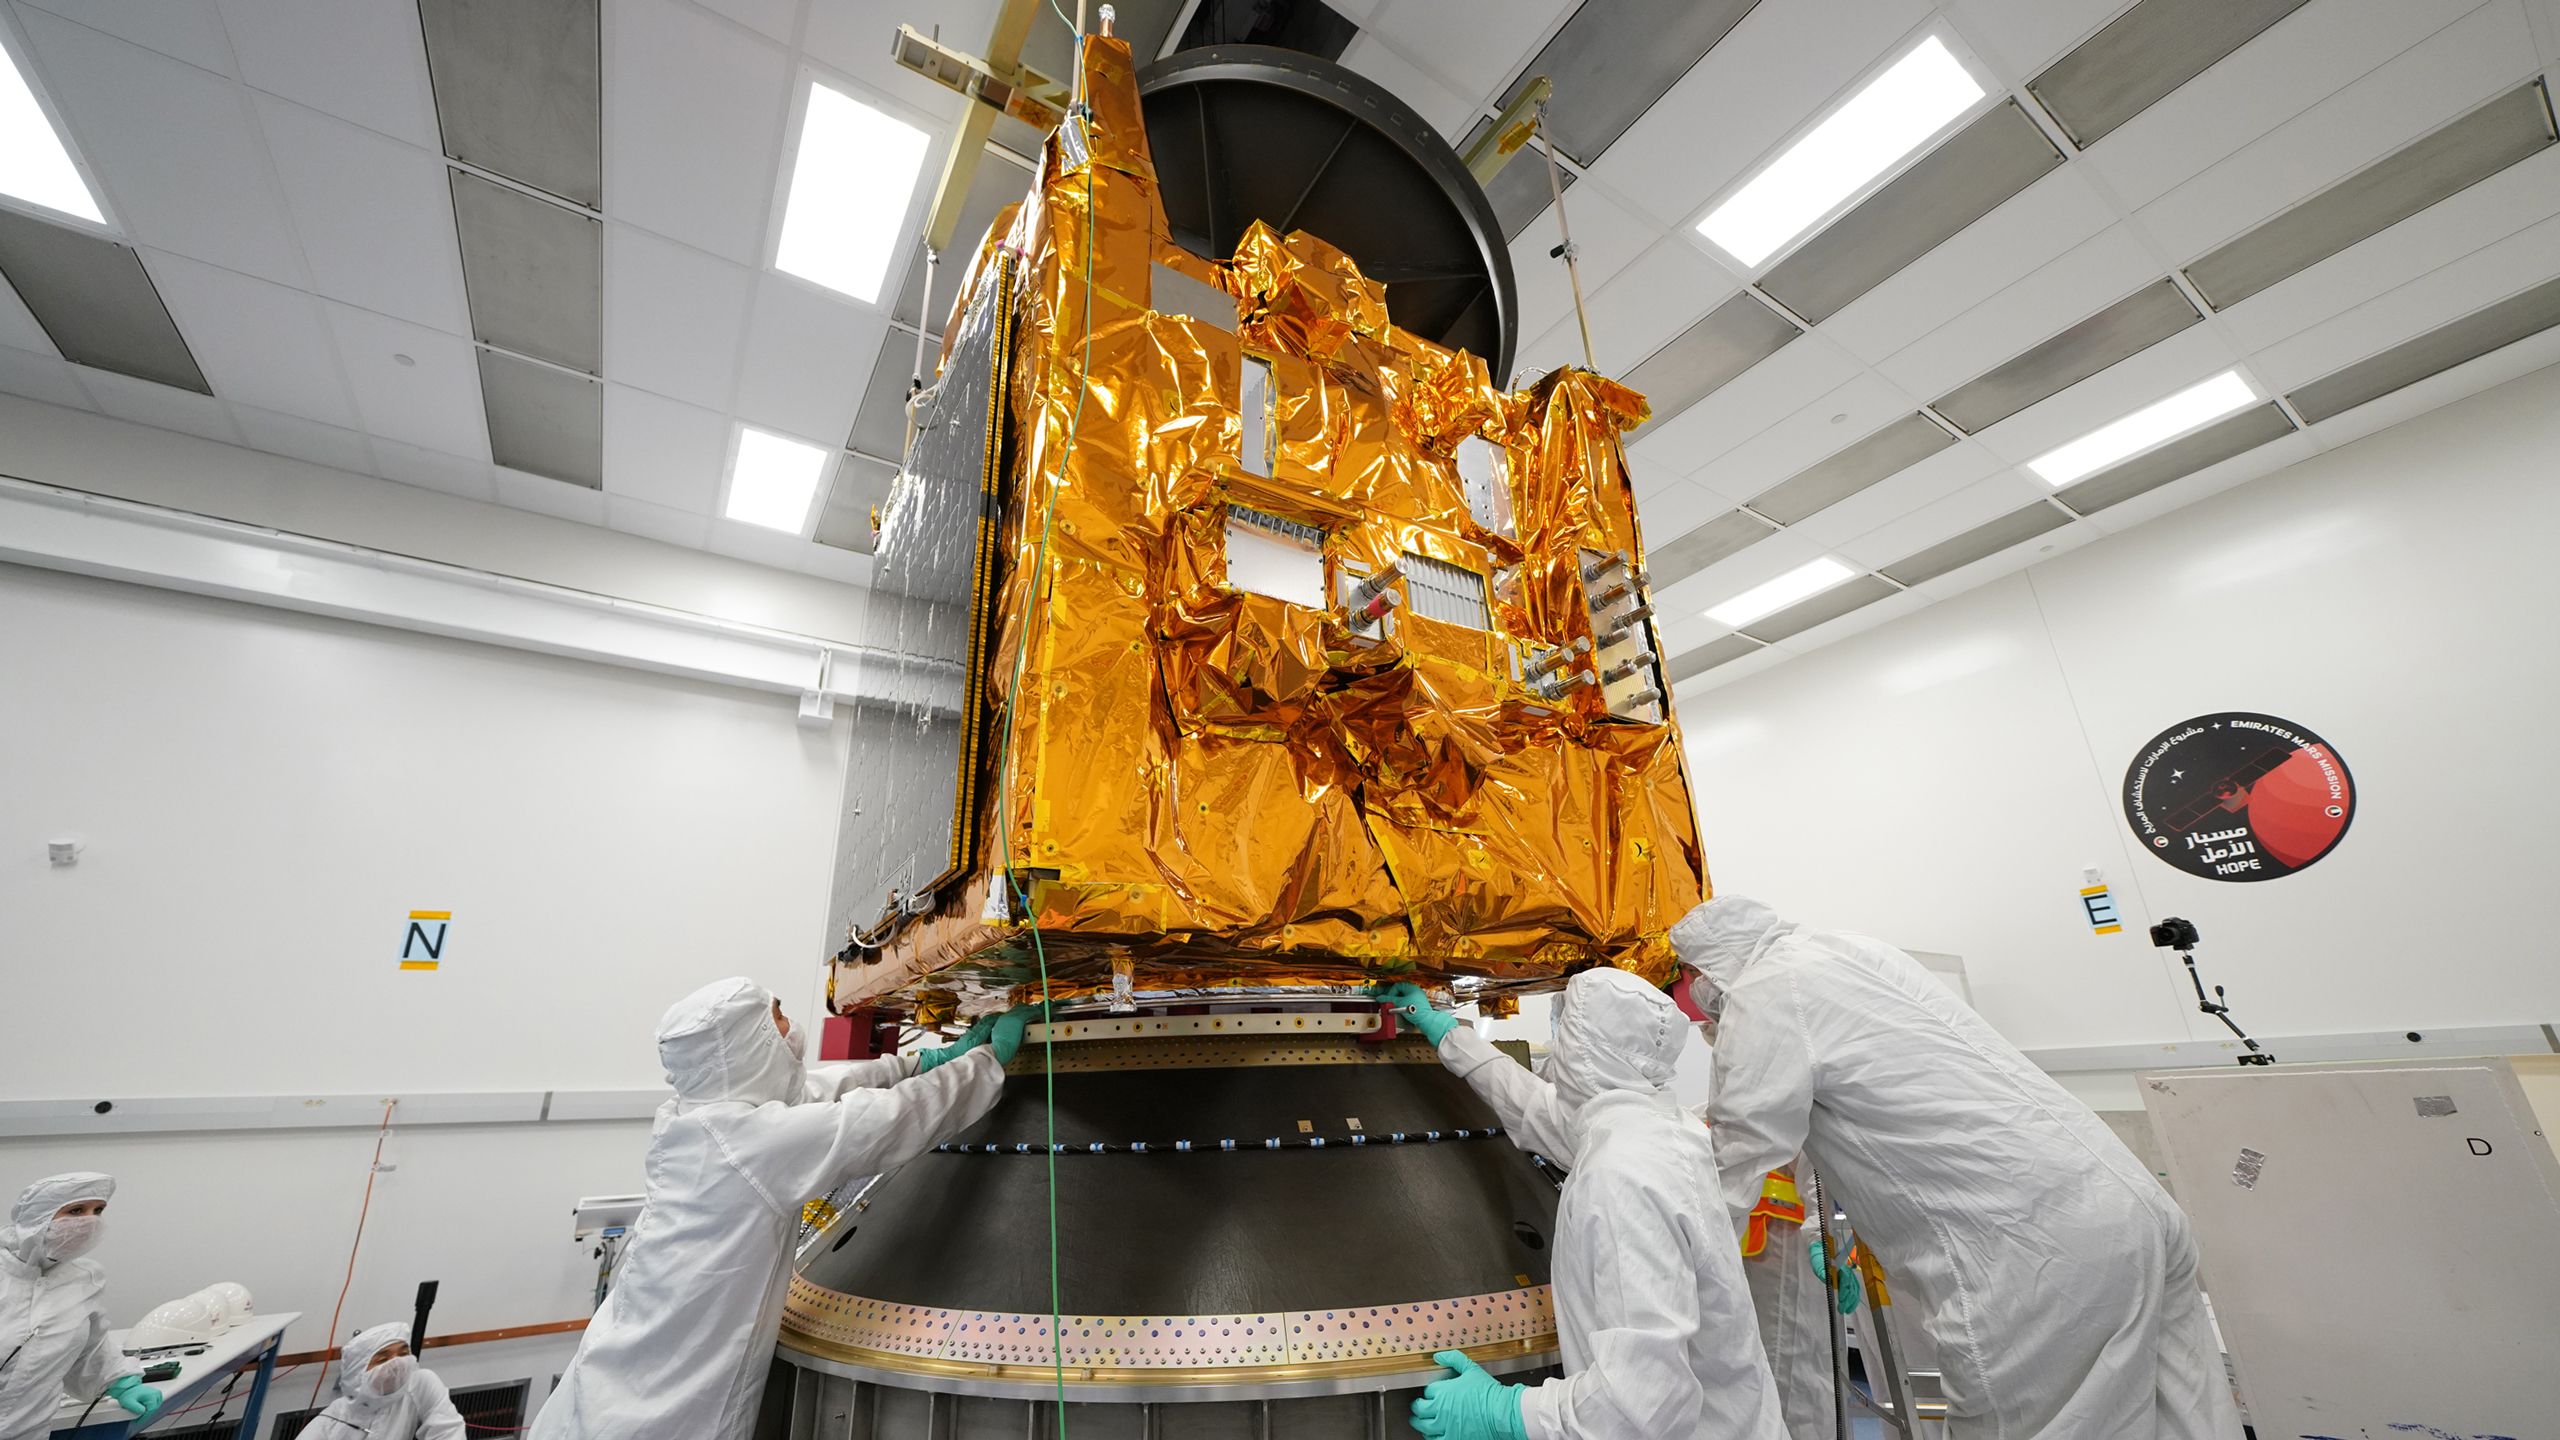 Engineers in white clean room suits reaching up towards the gold coloured central section of the Hope Probe.